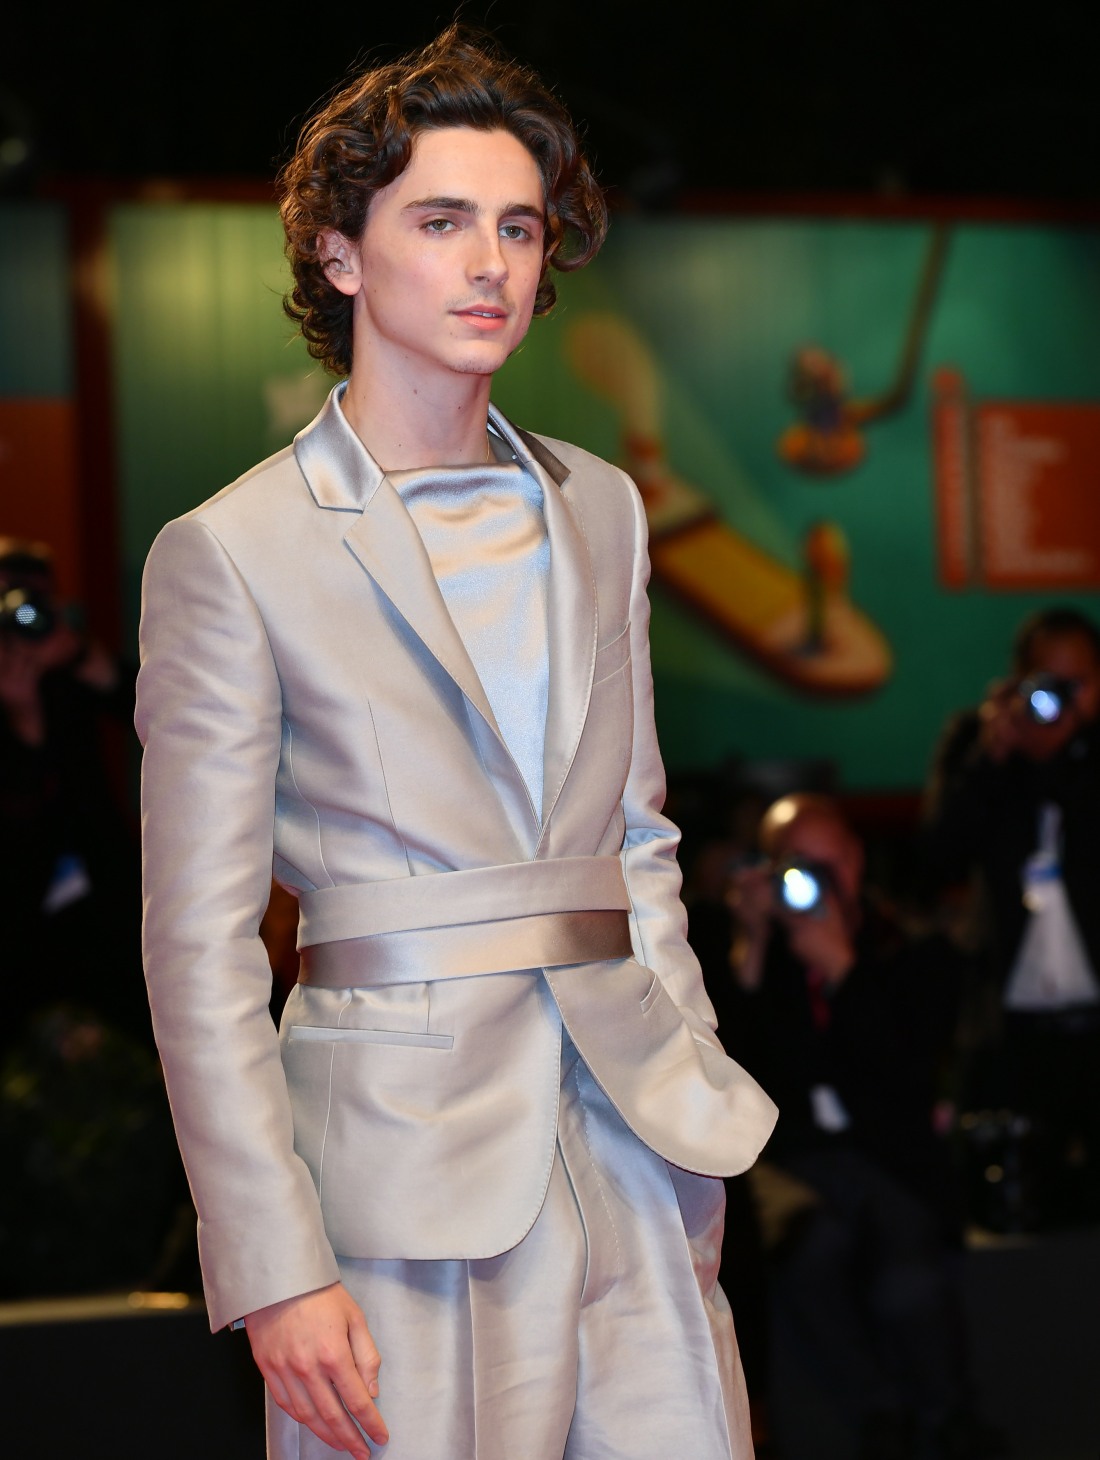 Timothee Chalamet during the red carpet of film ' The King ' at the 67th Venice Film Festival, Venice, ITALY-02-09-2019